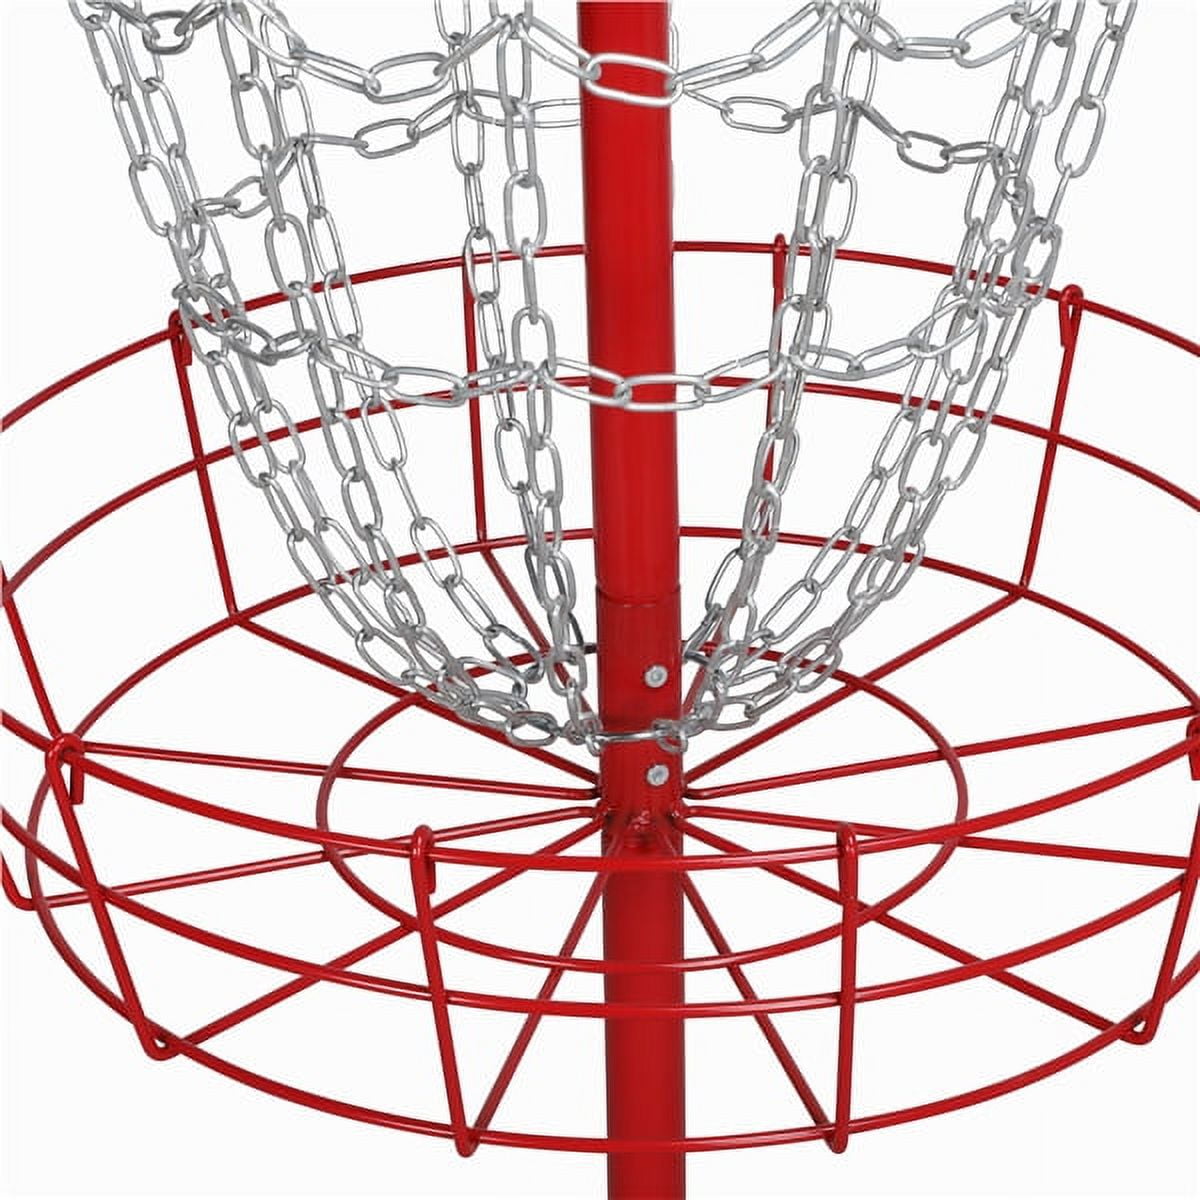 SmileMart 12-Chain Disc Golf Goal for Target Practice, Red